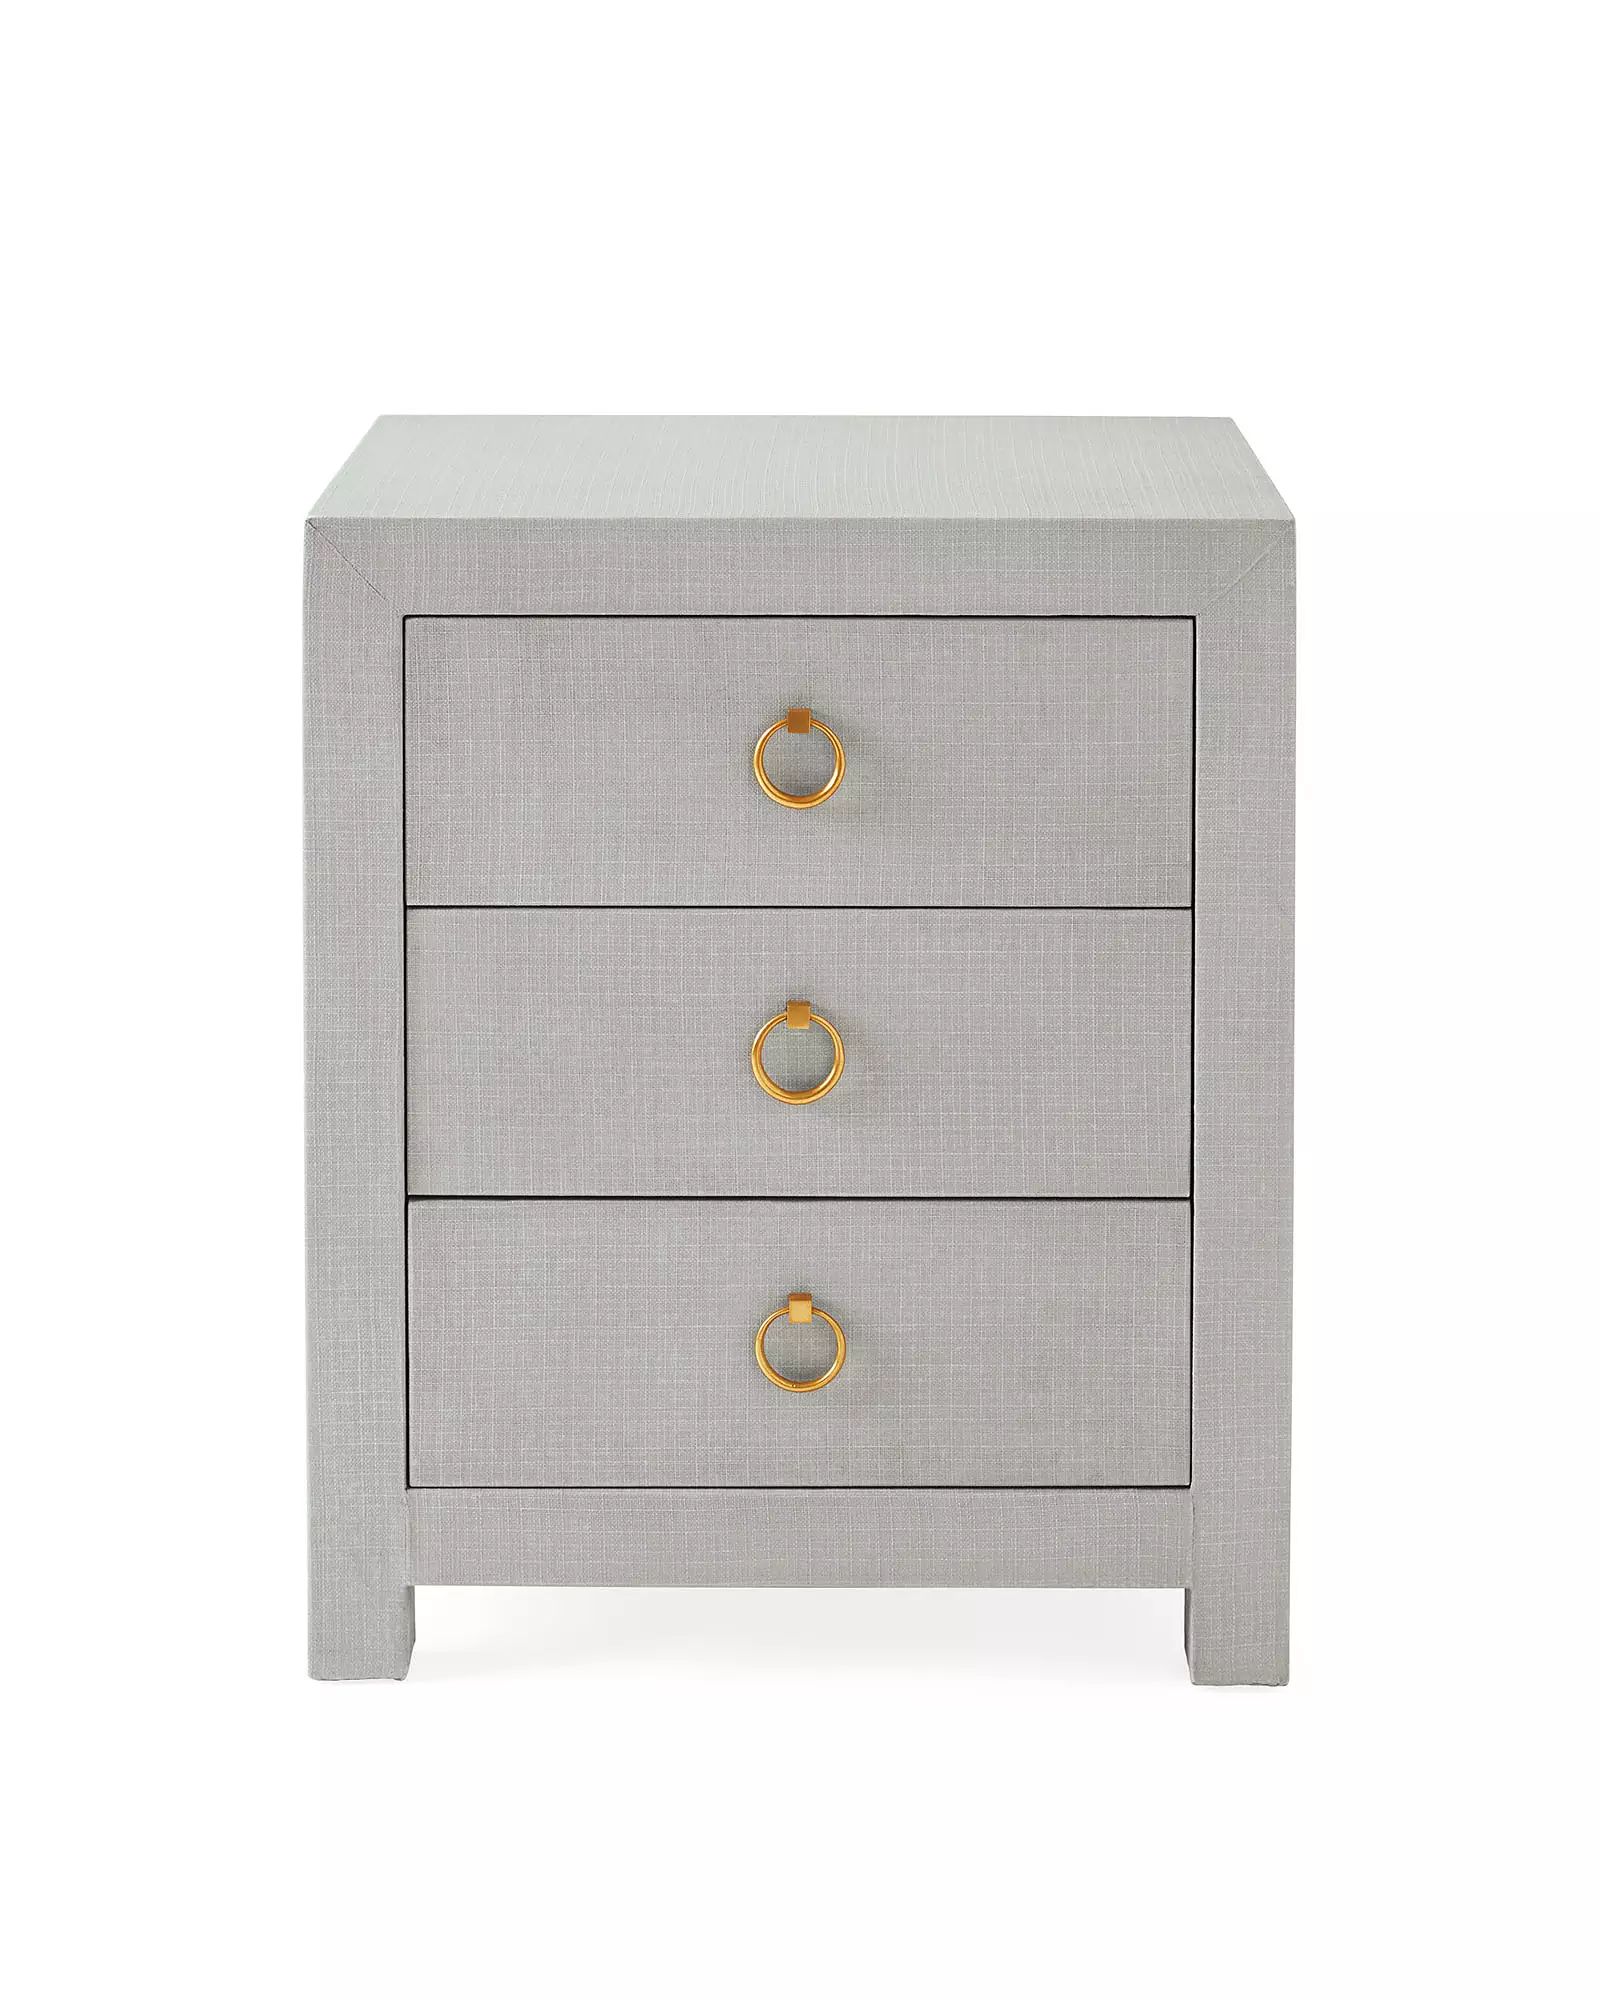 Driftway 3-Drawer Nightstand - Dove | Serena and Lily